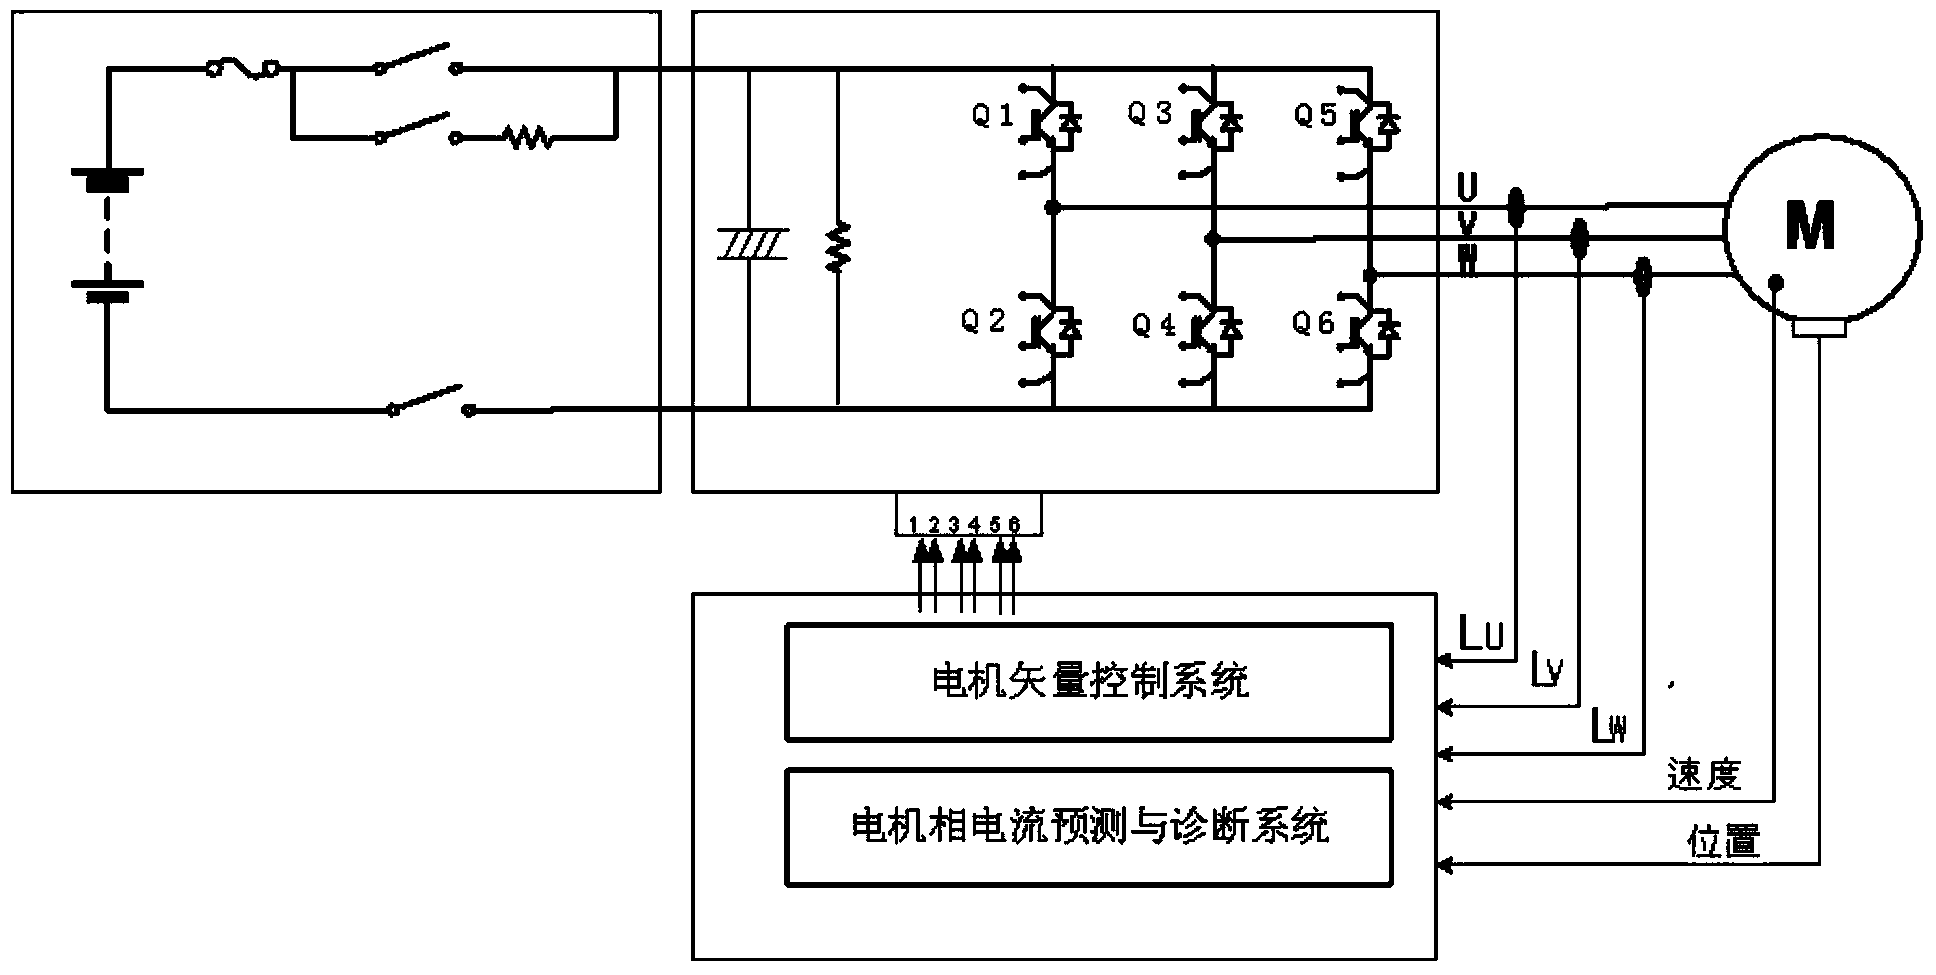 Motor phase current prediction and diagnosis method